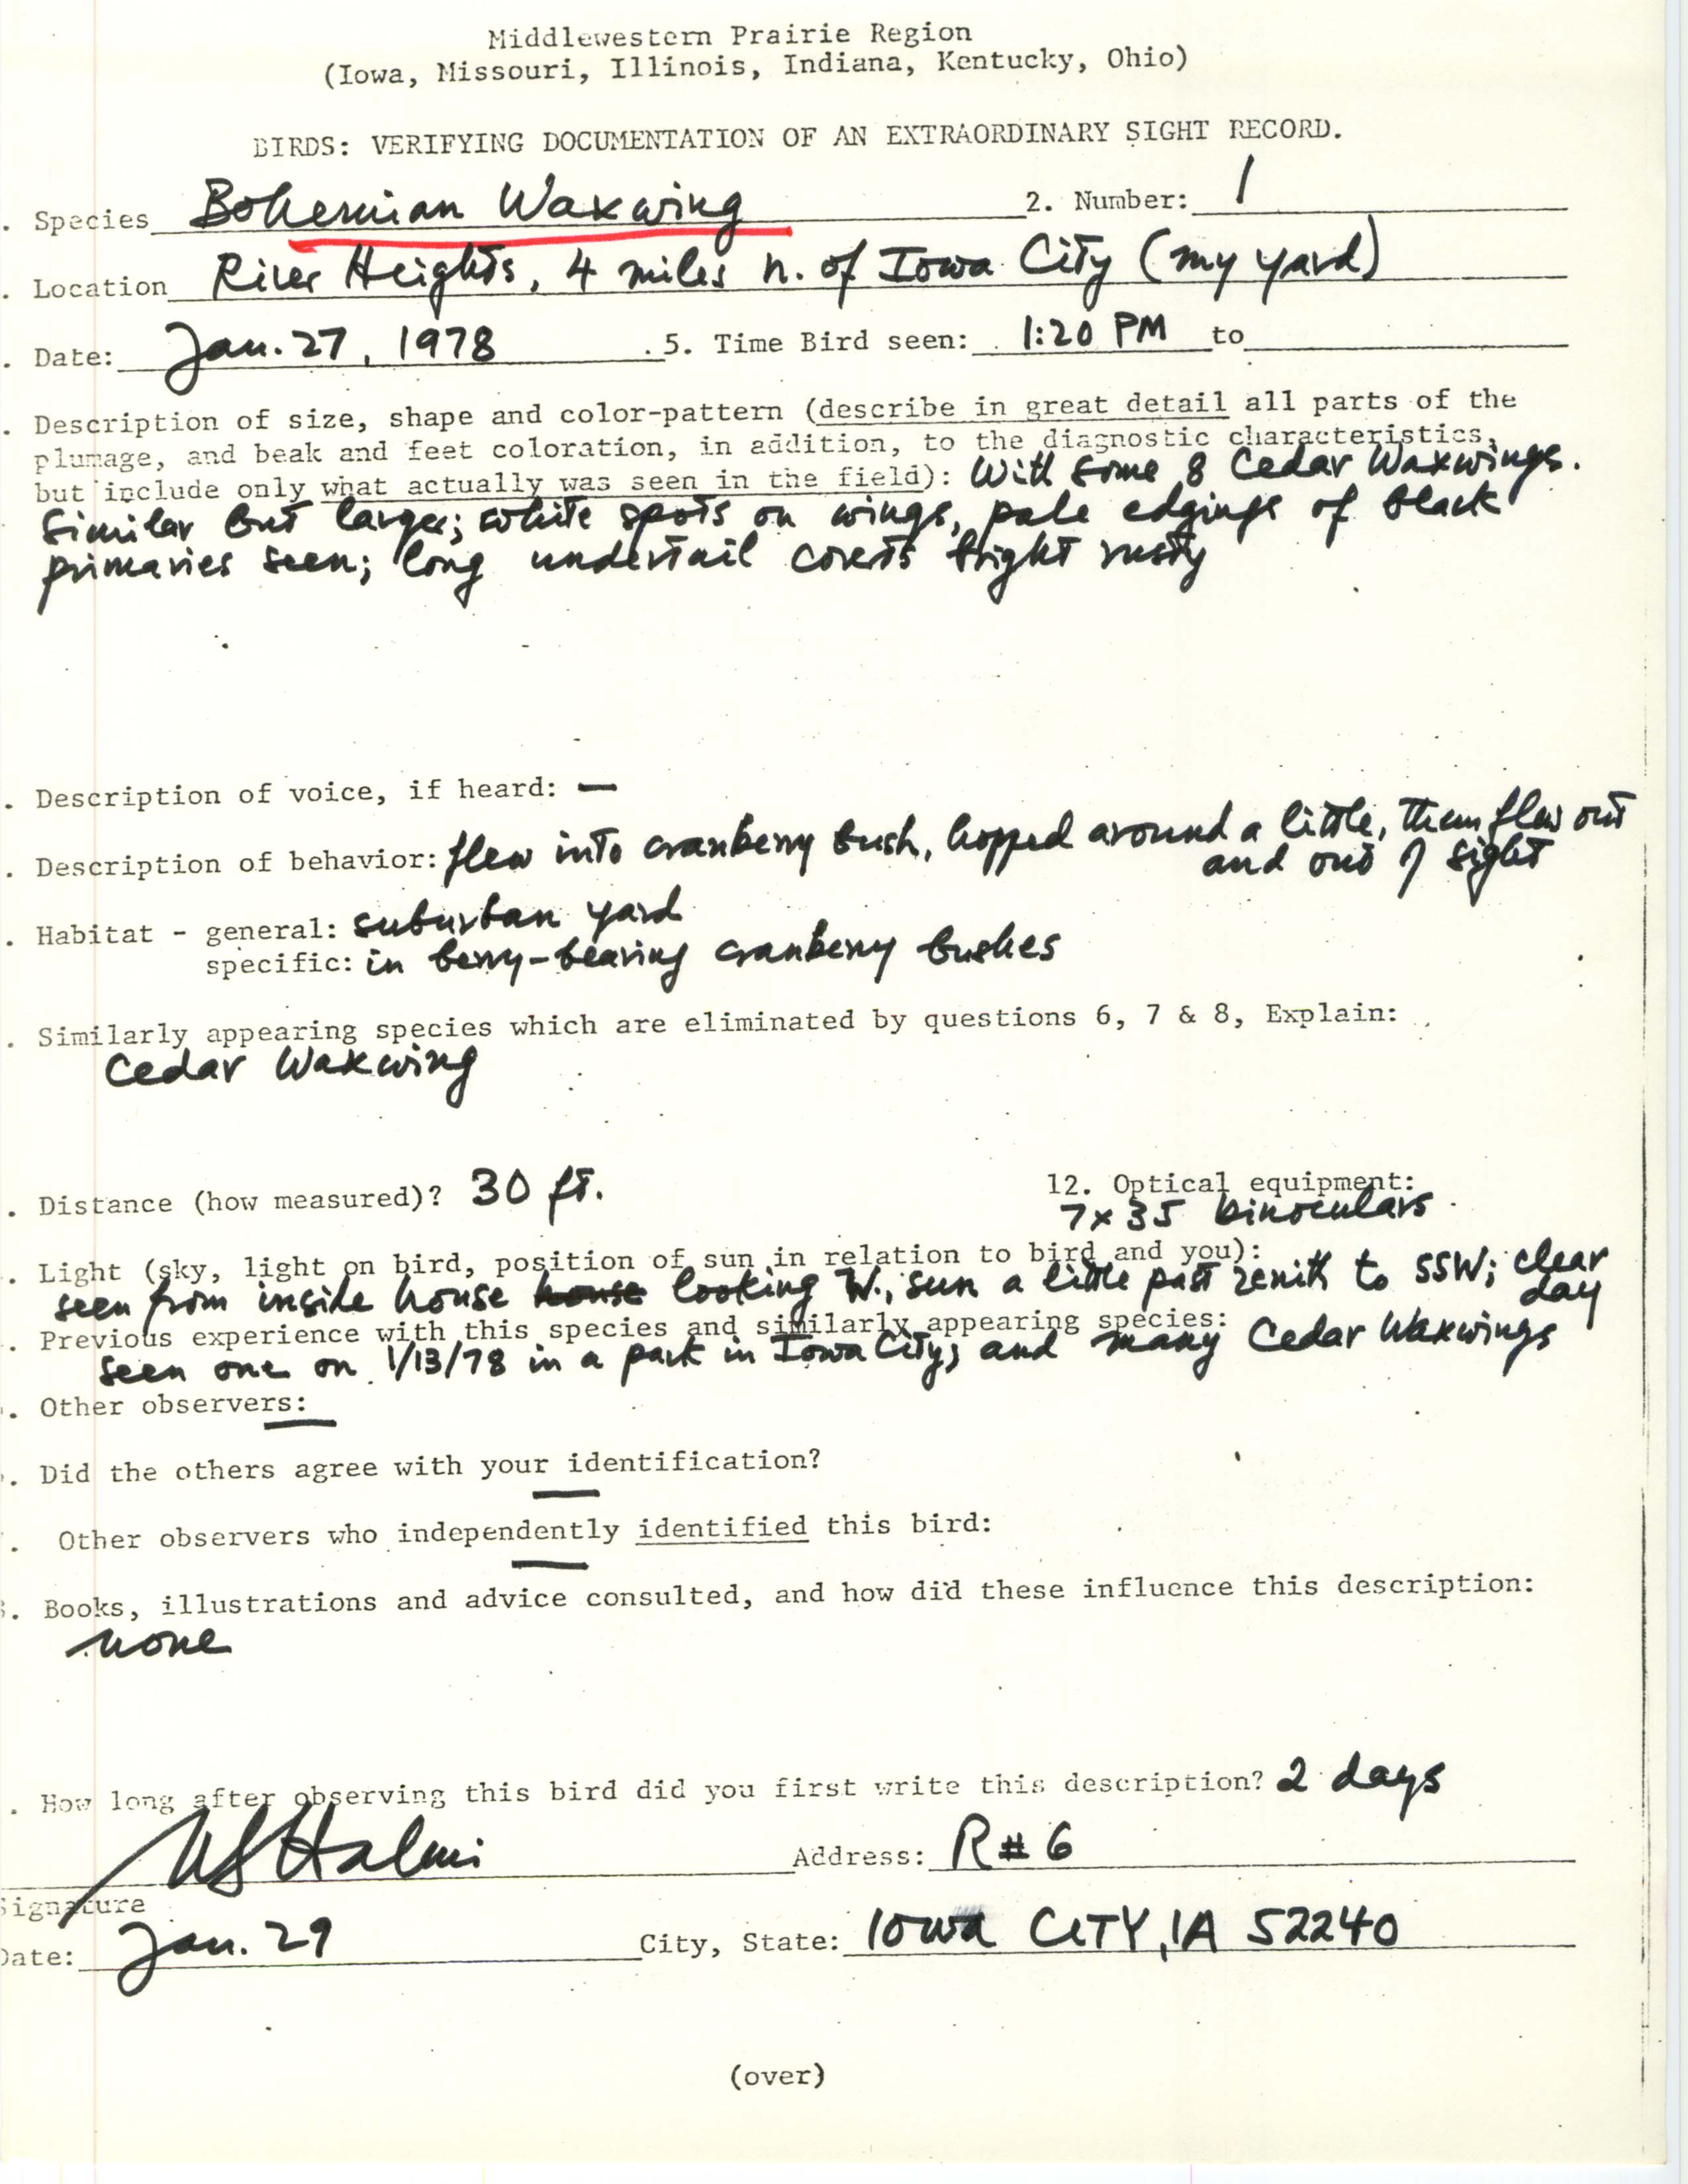 Rare bird documentation form for Bohemian Waxwing at River Heights in north Iowa City, 1978